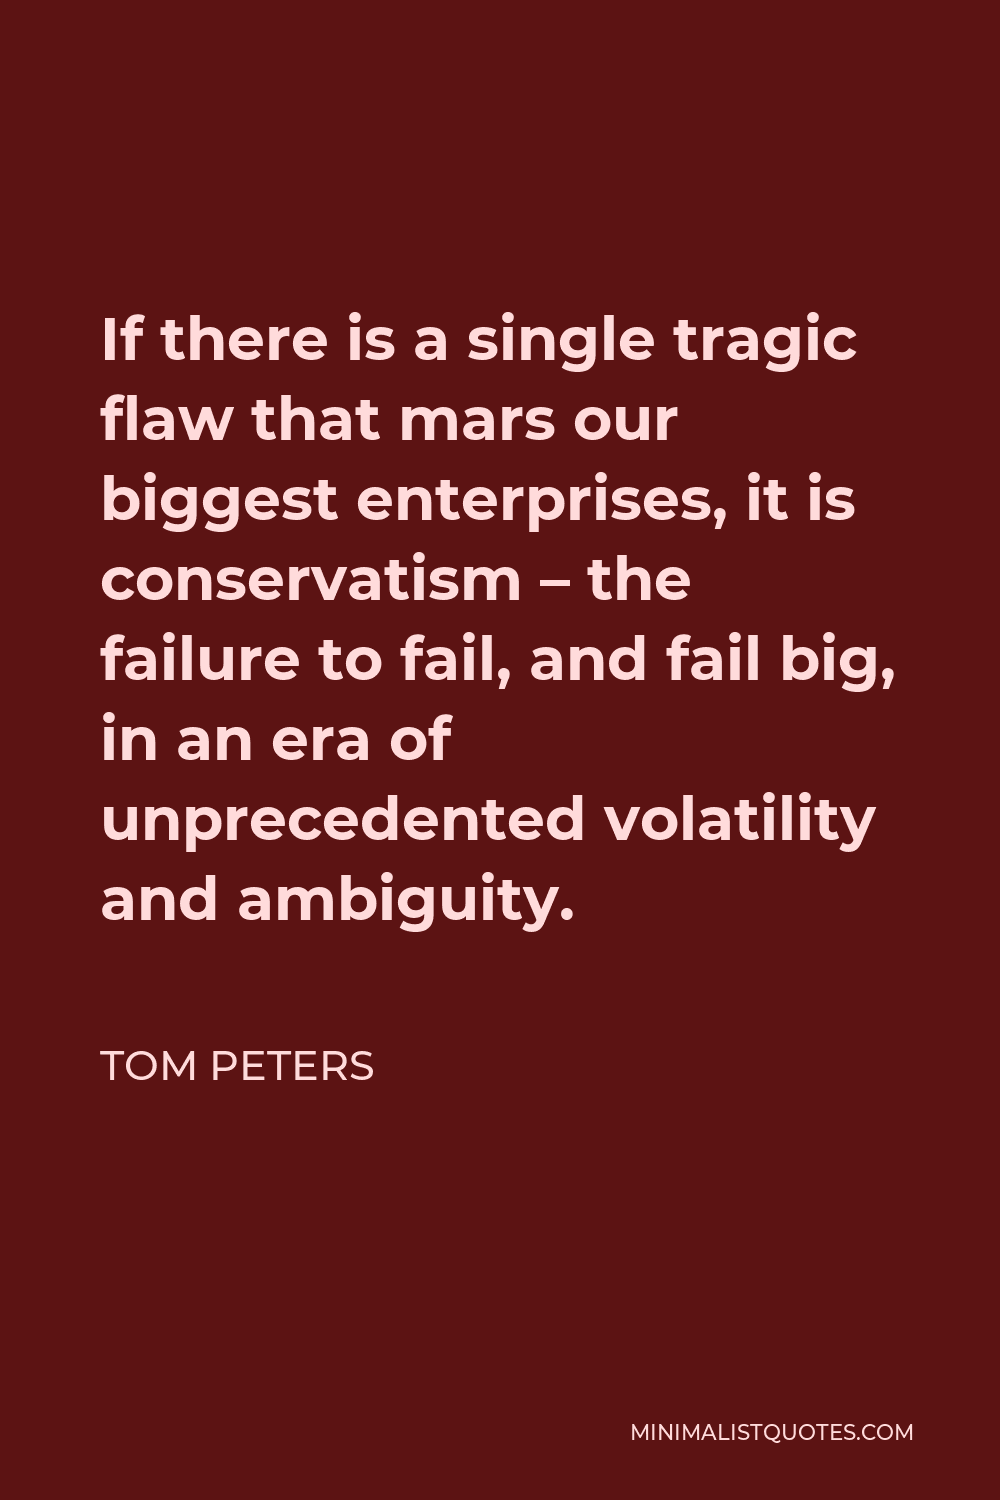 Tom Peters Quote - If there is a single tragic flaw that mars our biggest enterprises, it is conservatism – the failure to fail, and fail big, in an era of unprecedented volatility and ambiguity.